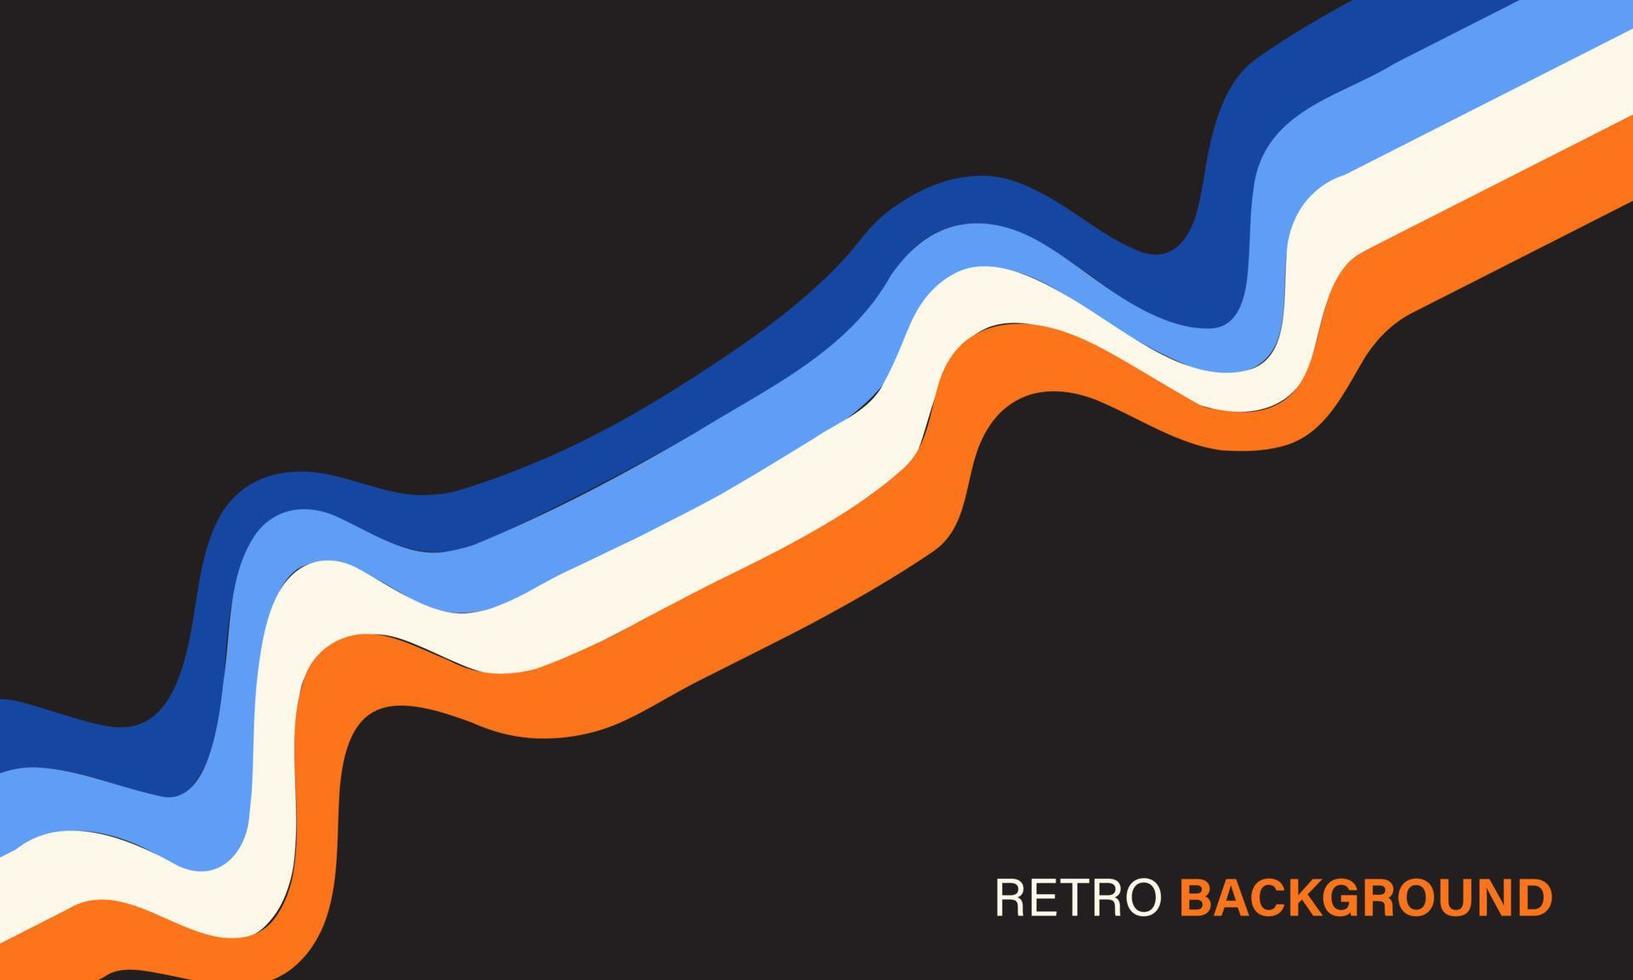 Retro abstract background vector